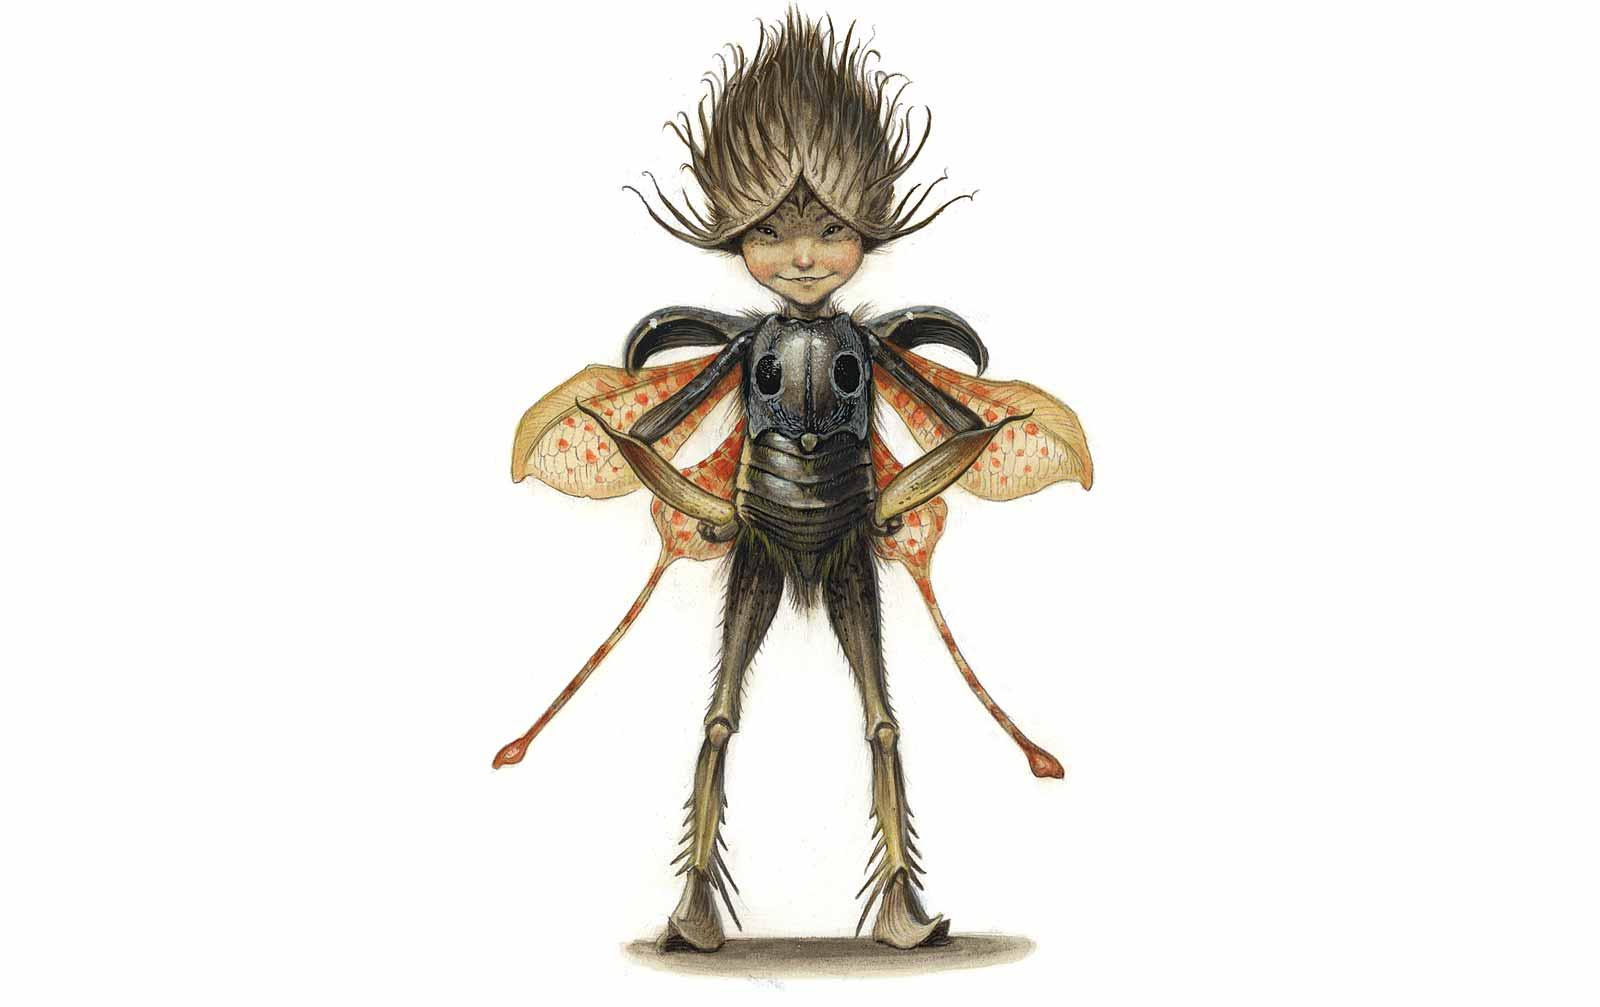 Tony DiTerlizzi. Toadshade Sprite from Arthur Spiderwicks Field Guide to the Fantastical World Around You, 2005.